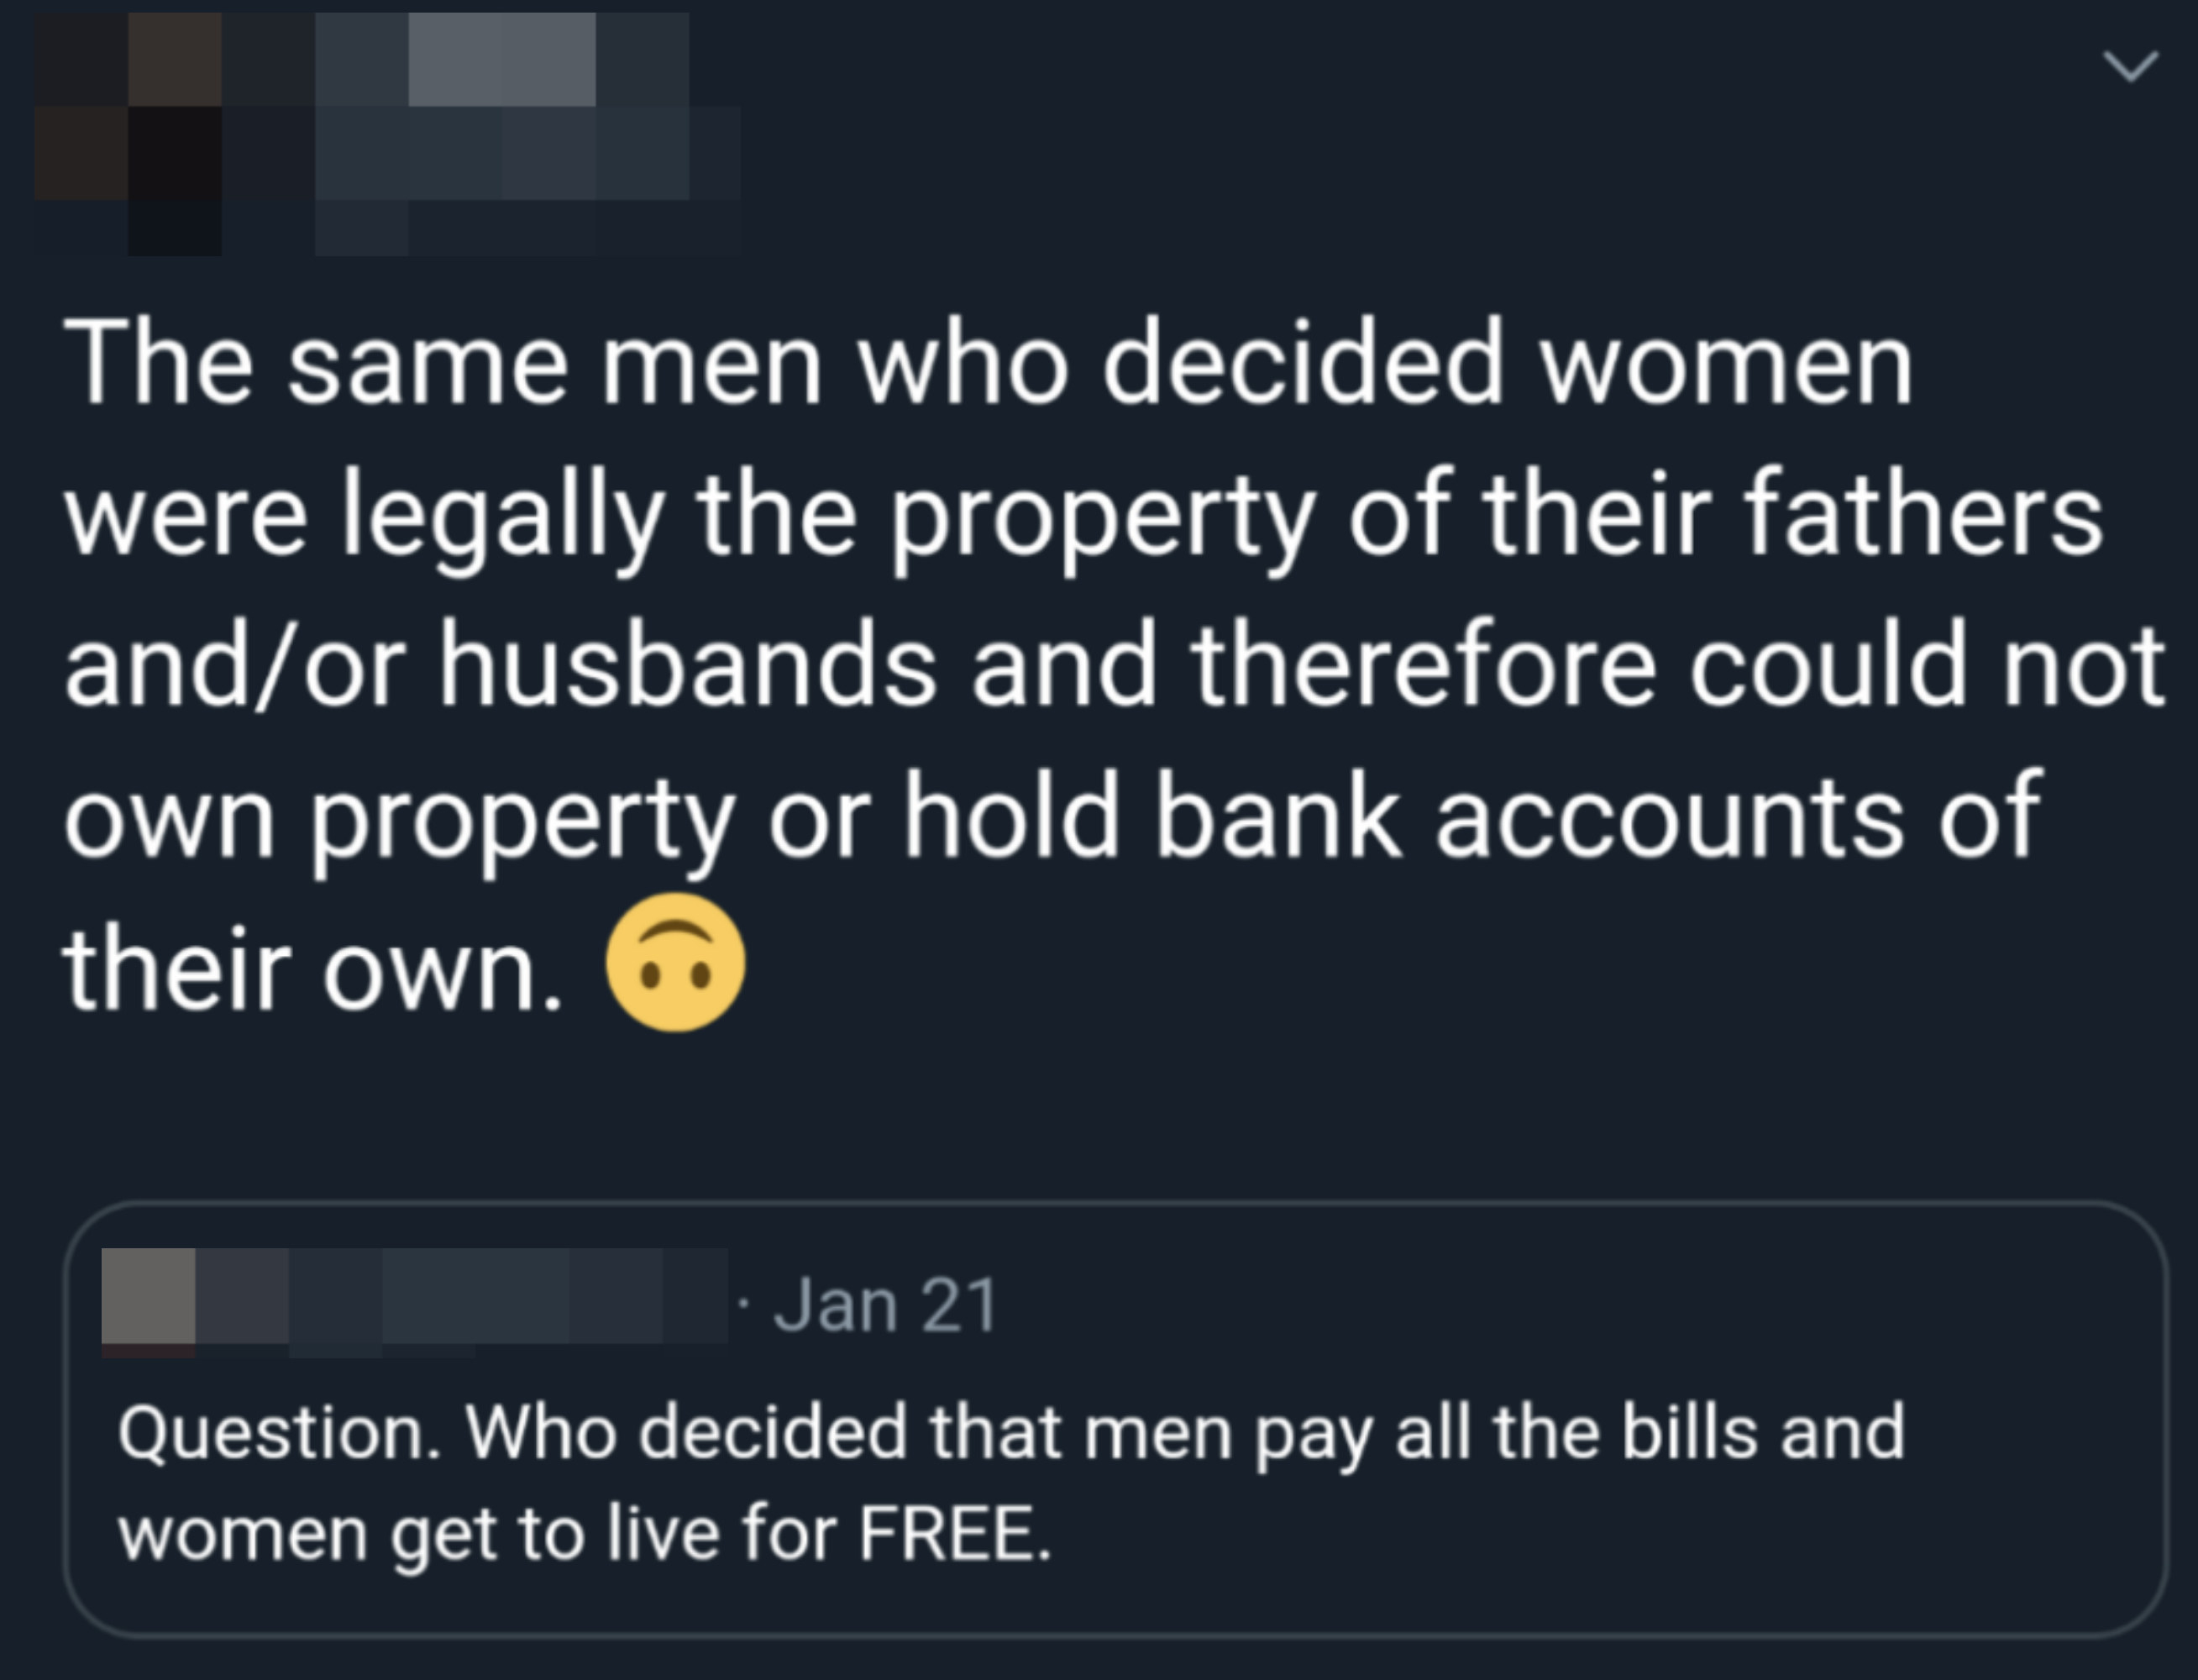 man thinks women live for free while men pay for everything and commenter said it&#x27;s the same men that think of women as property and shouldn&#x27;t own property or hold their own bank accounts